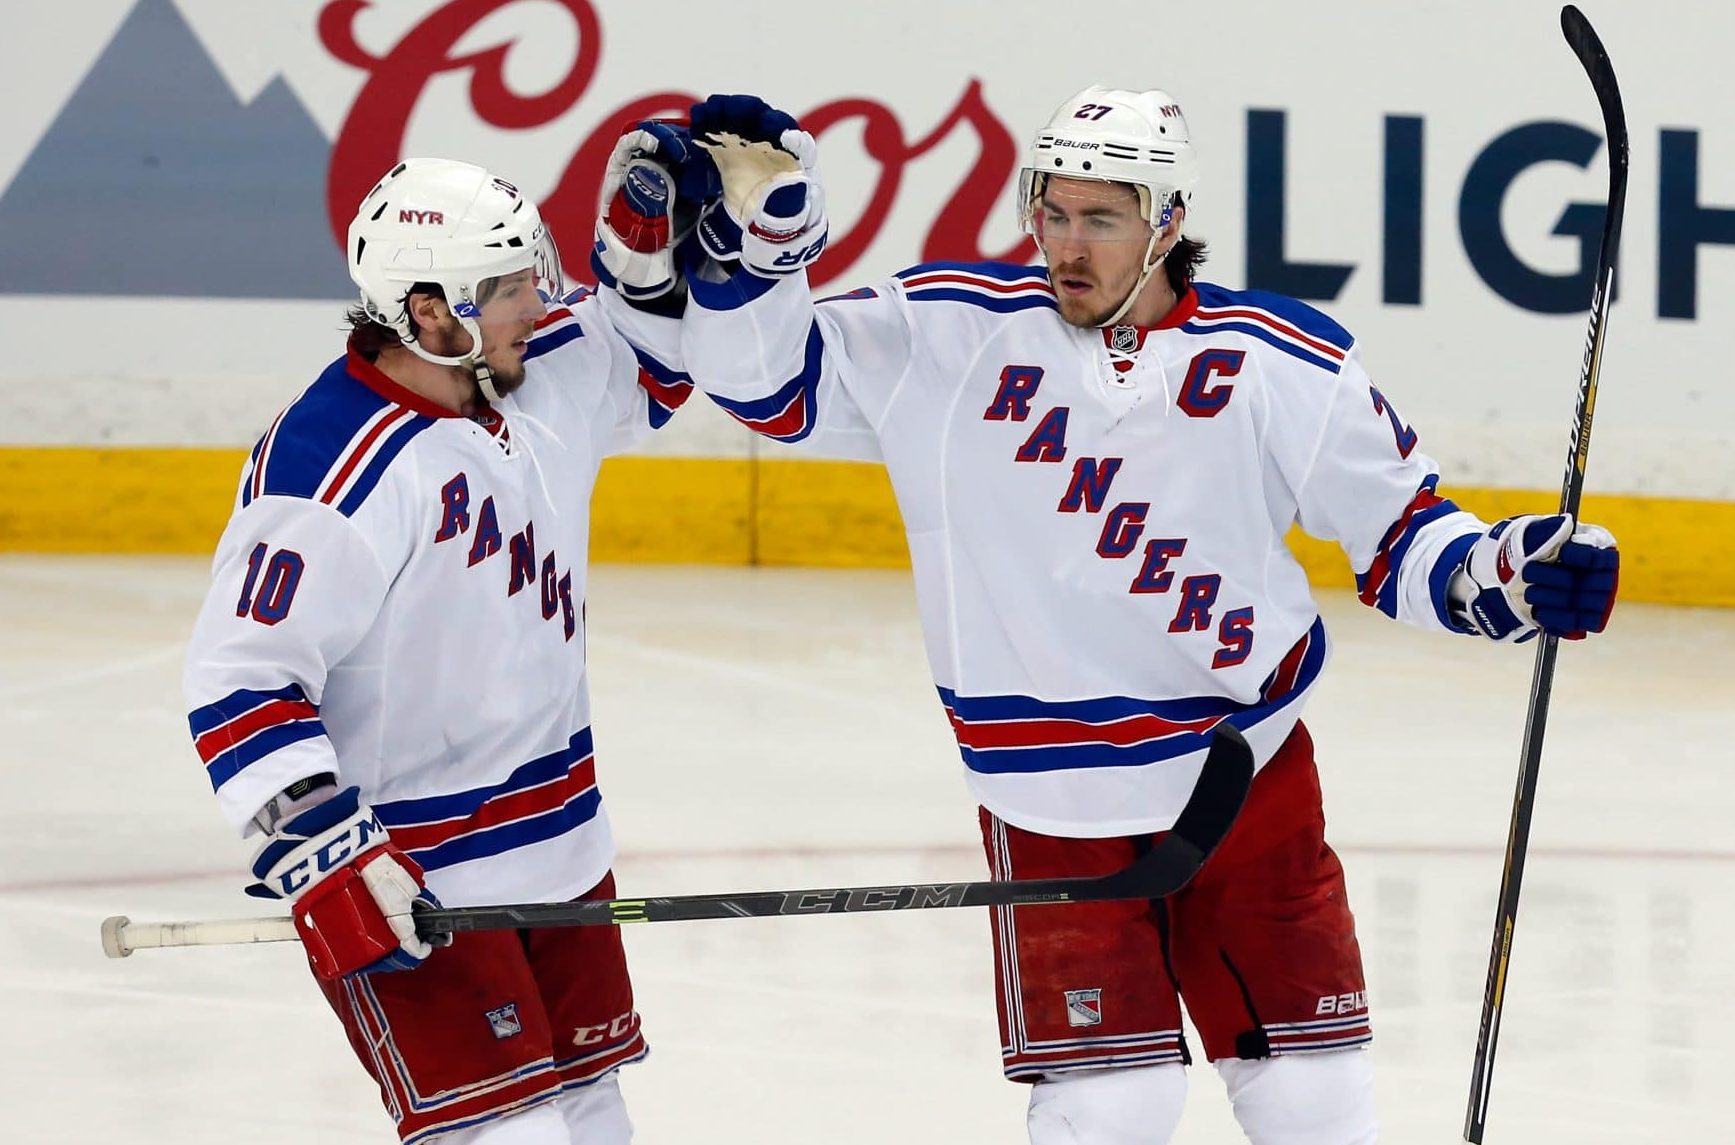 New York Ranger General Manager Jeff Gorton discussed the deal that sent Ryan McDonagh and J.t. Miller to Tampa Bay